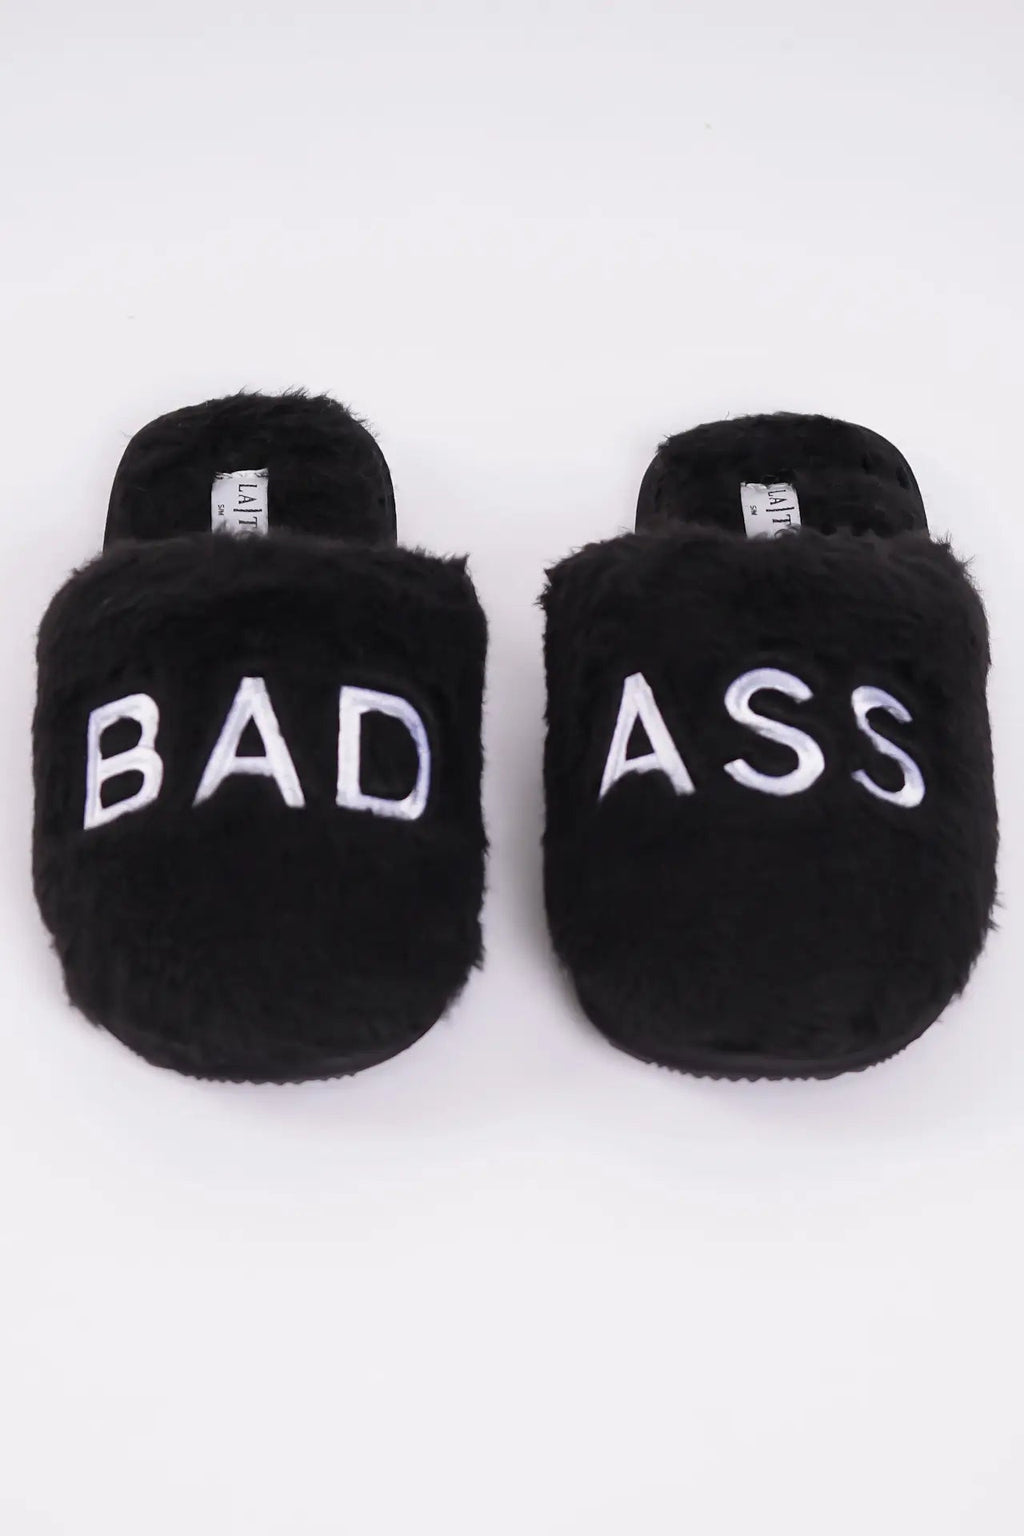 Shop LA Trading Co Bel Air Bad Ass Slippers Online – Spoiled Brat